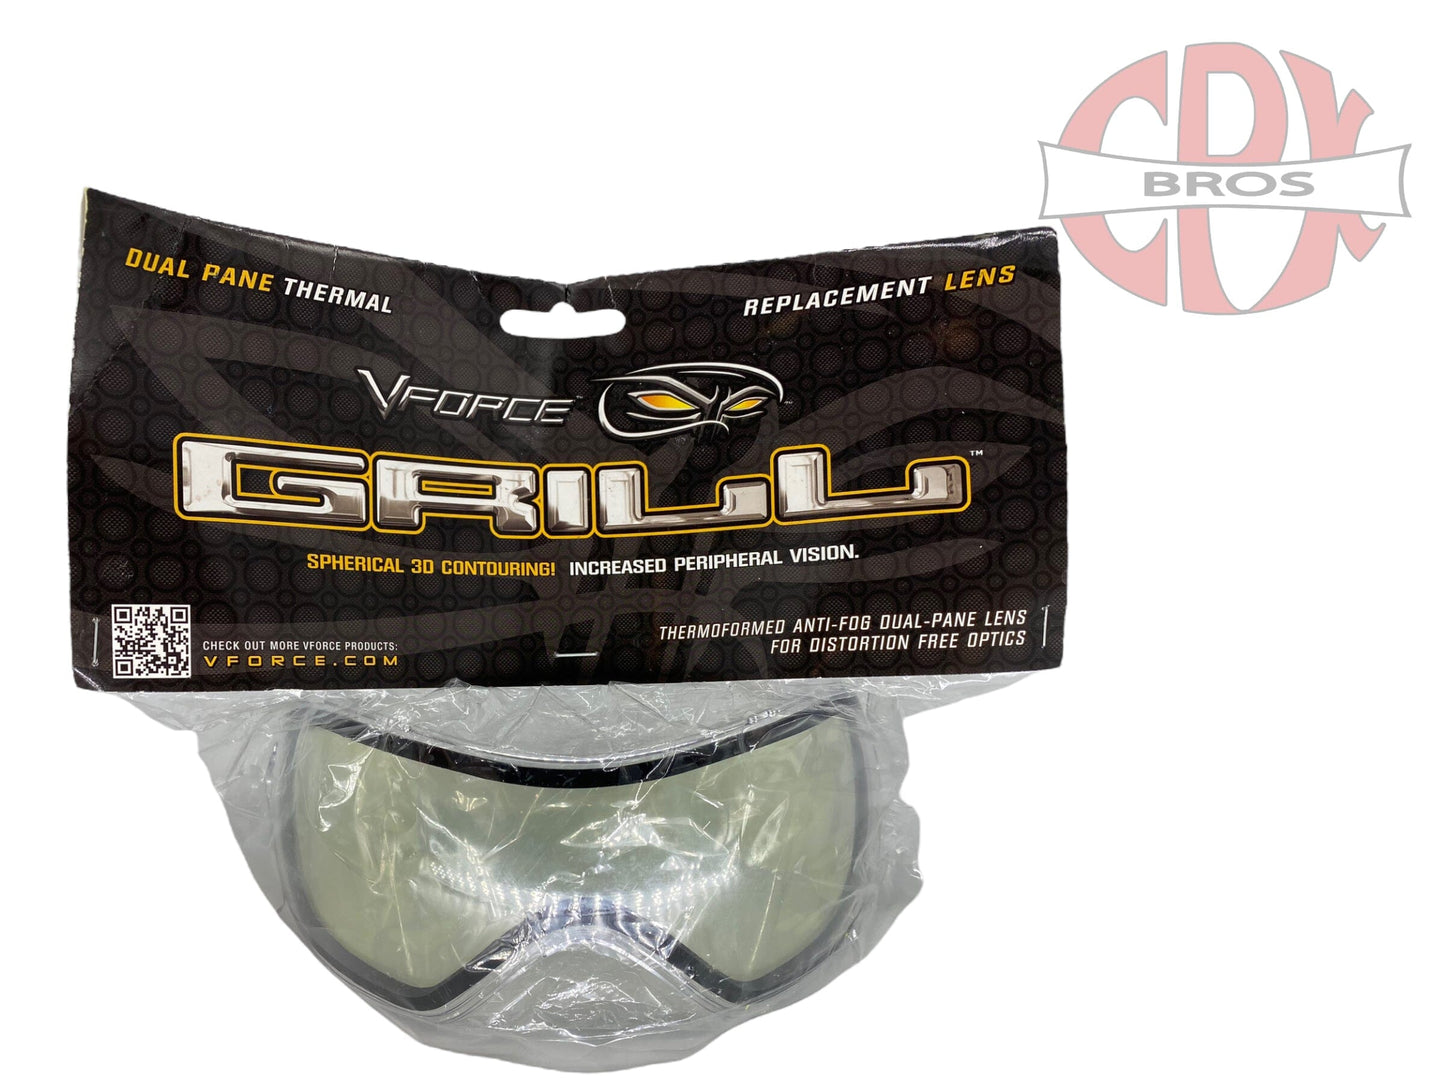 Used NEW V-Force Grill Replacement Lens Paintball Gun from CPXBrosPaintball Buy/Sell/Trade Paintball Markers, Paintball Hoppers, Paintball Masks, and Hormesis Headbands